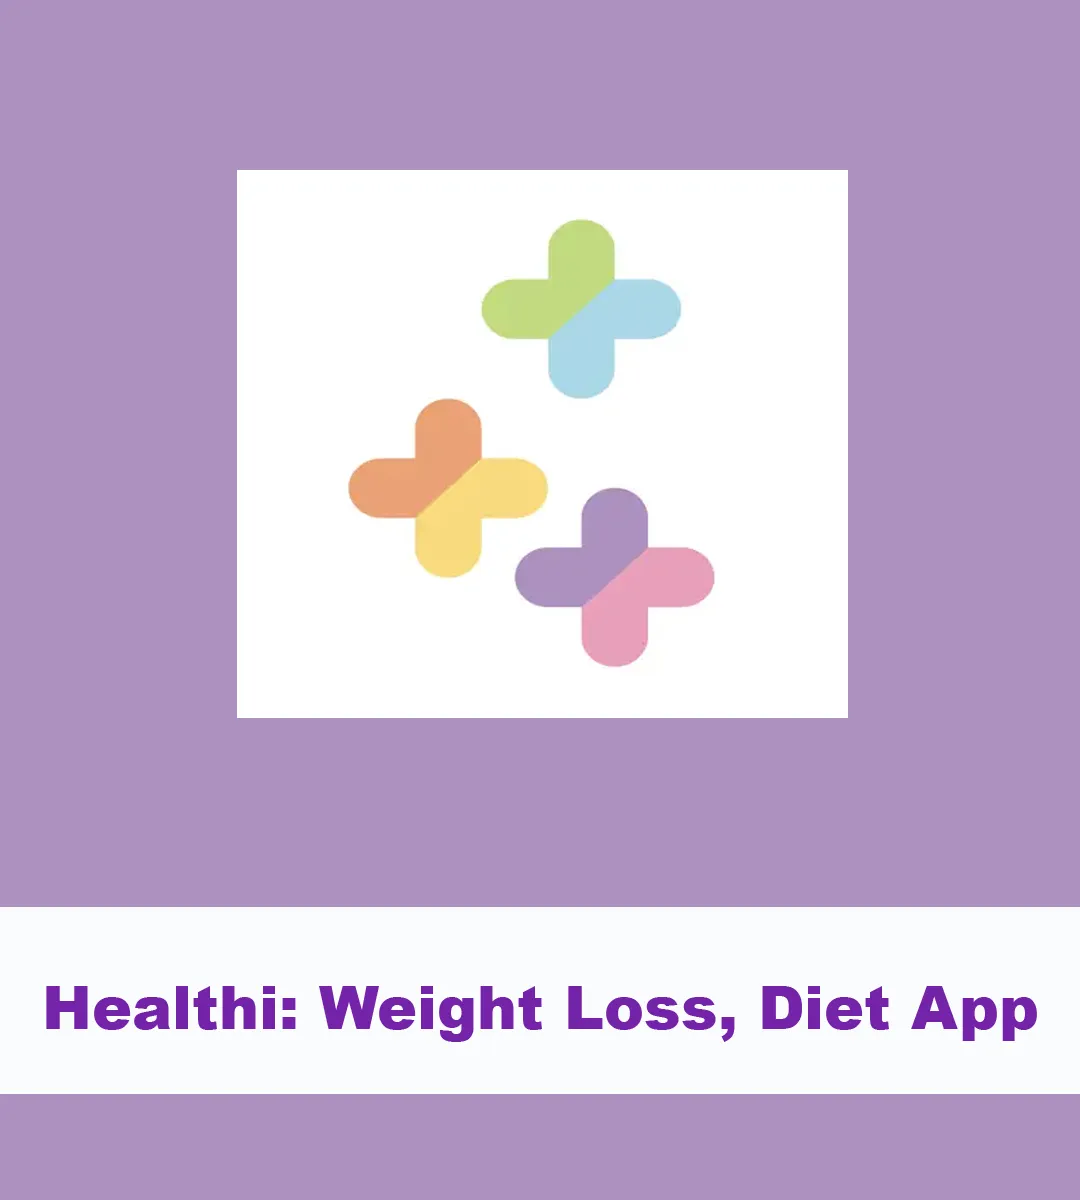 Healthi App to Monitor Your Calories